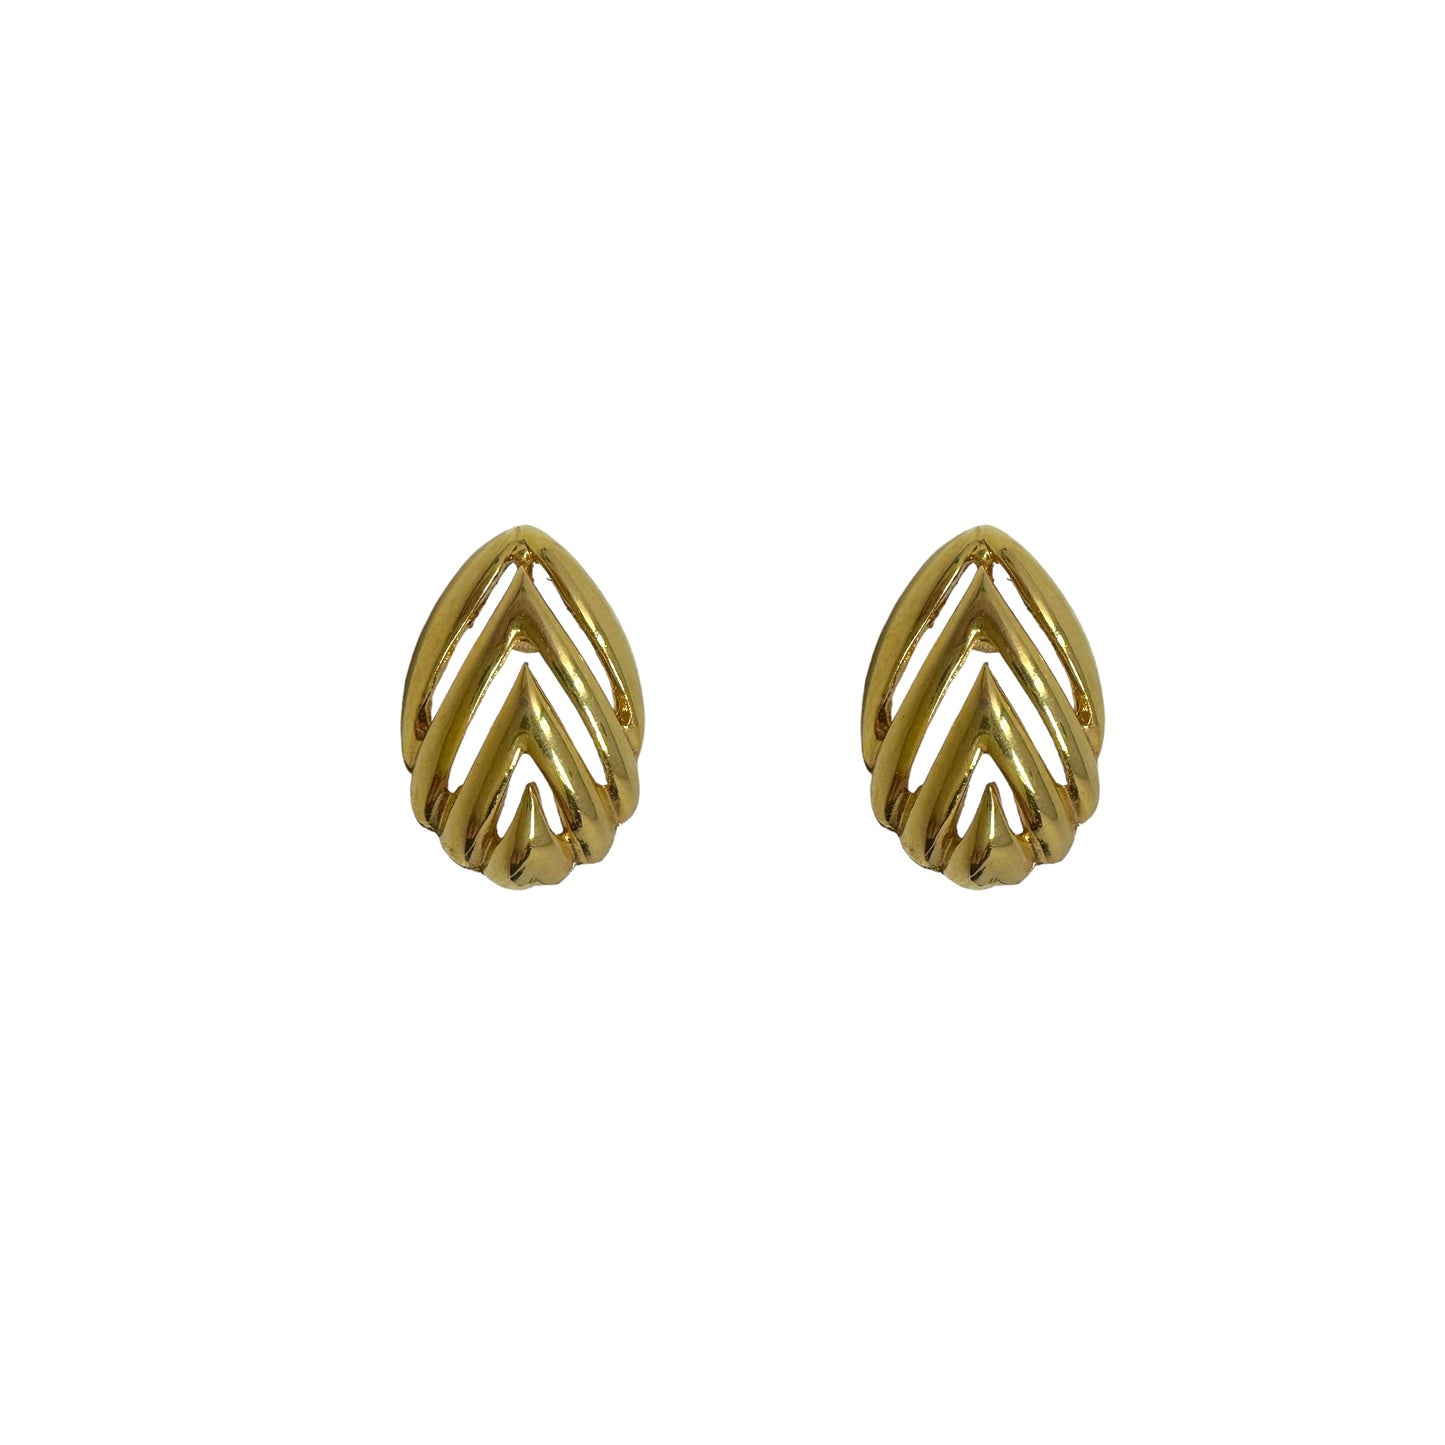 Gold Tone Earrings Stud By Unknown Brand